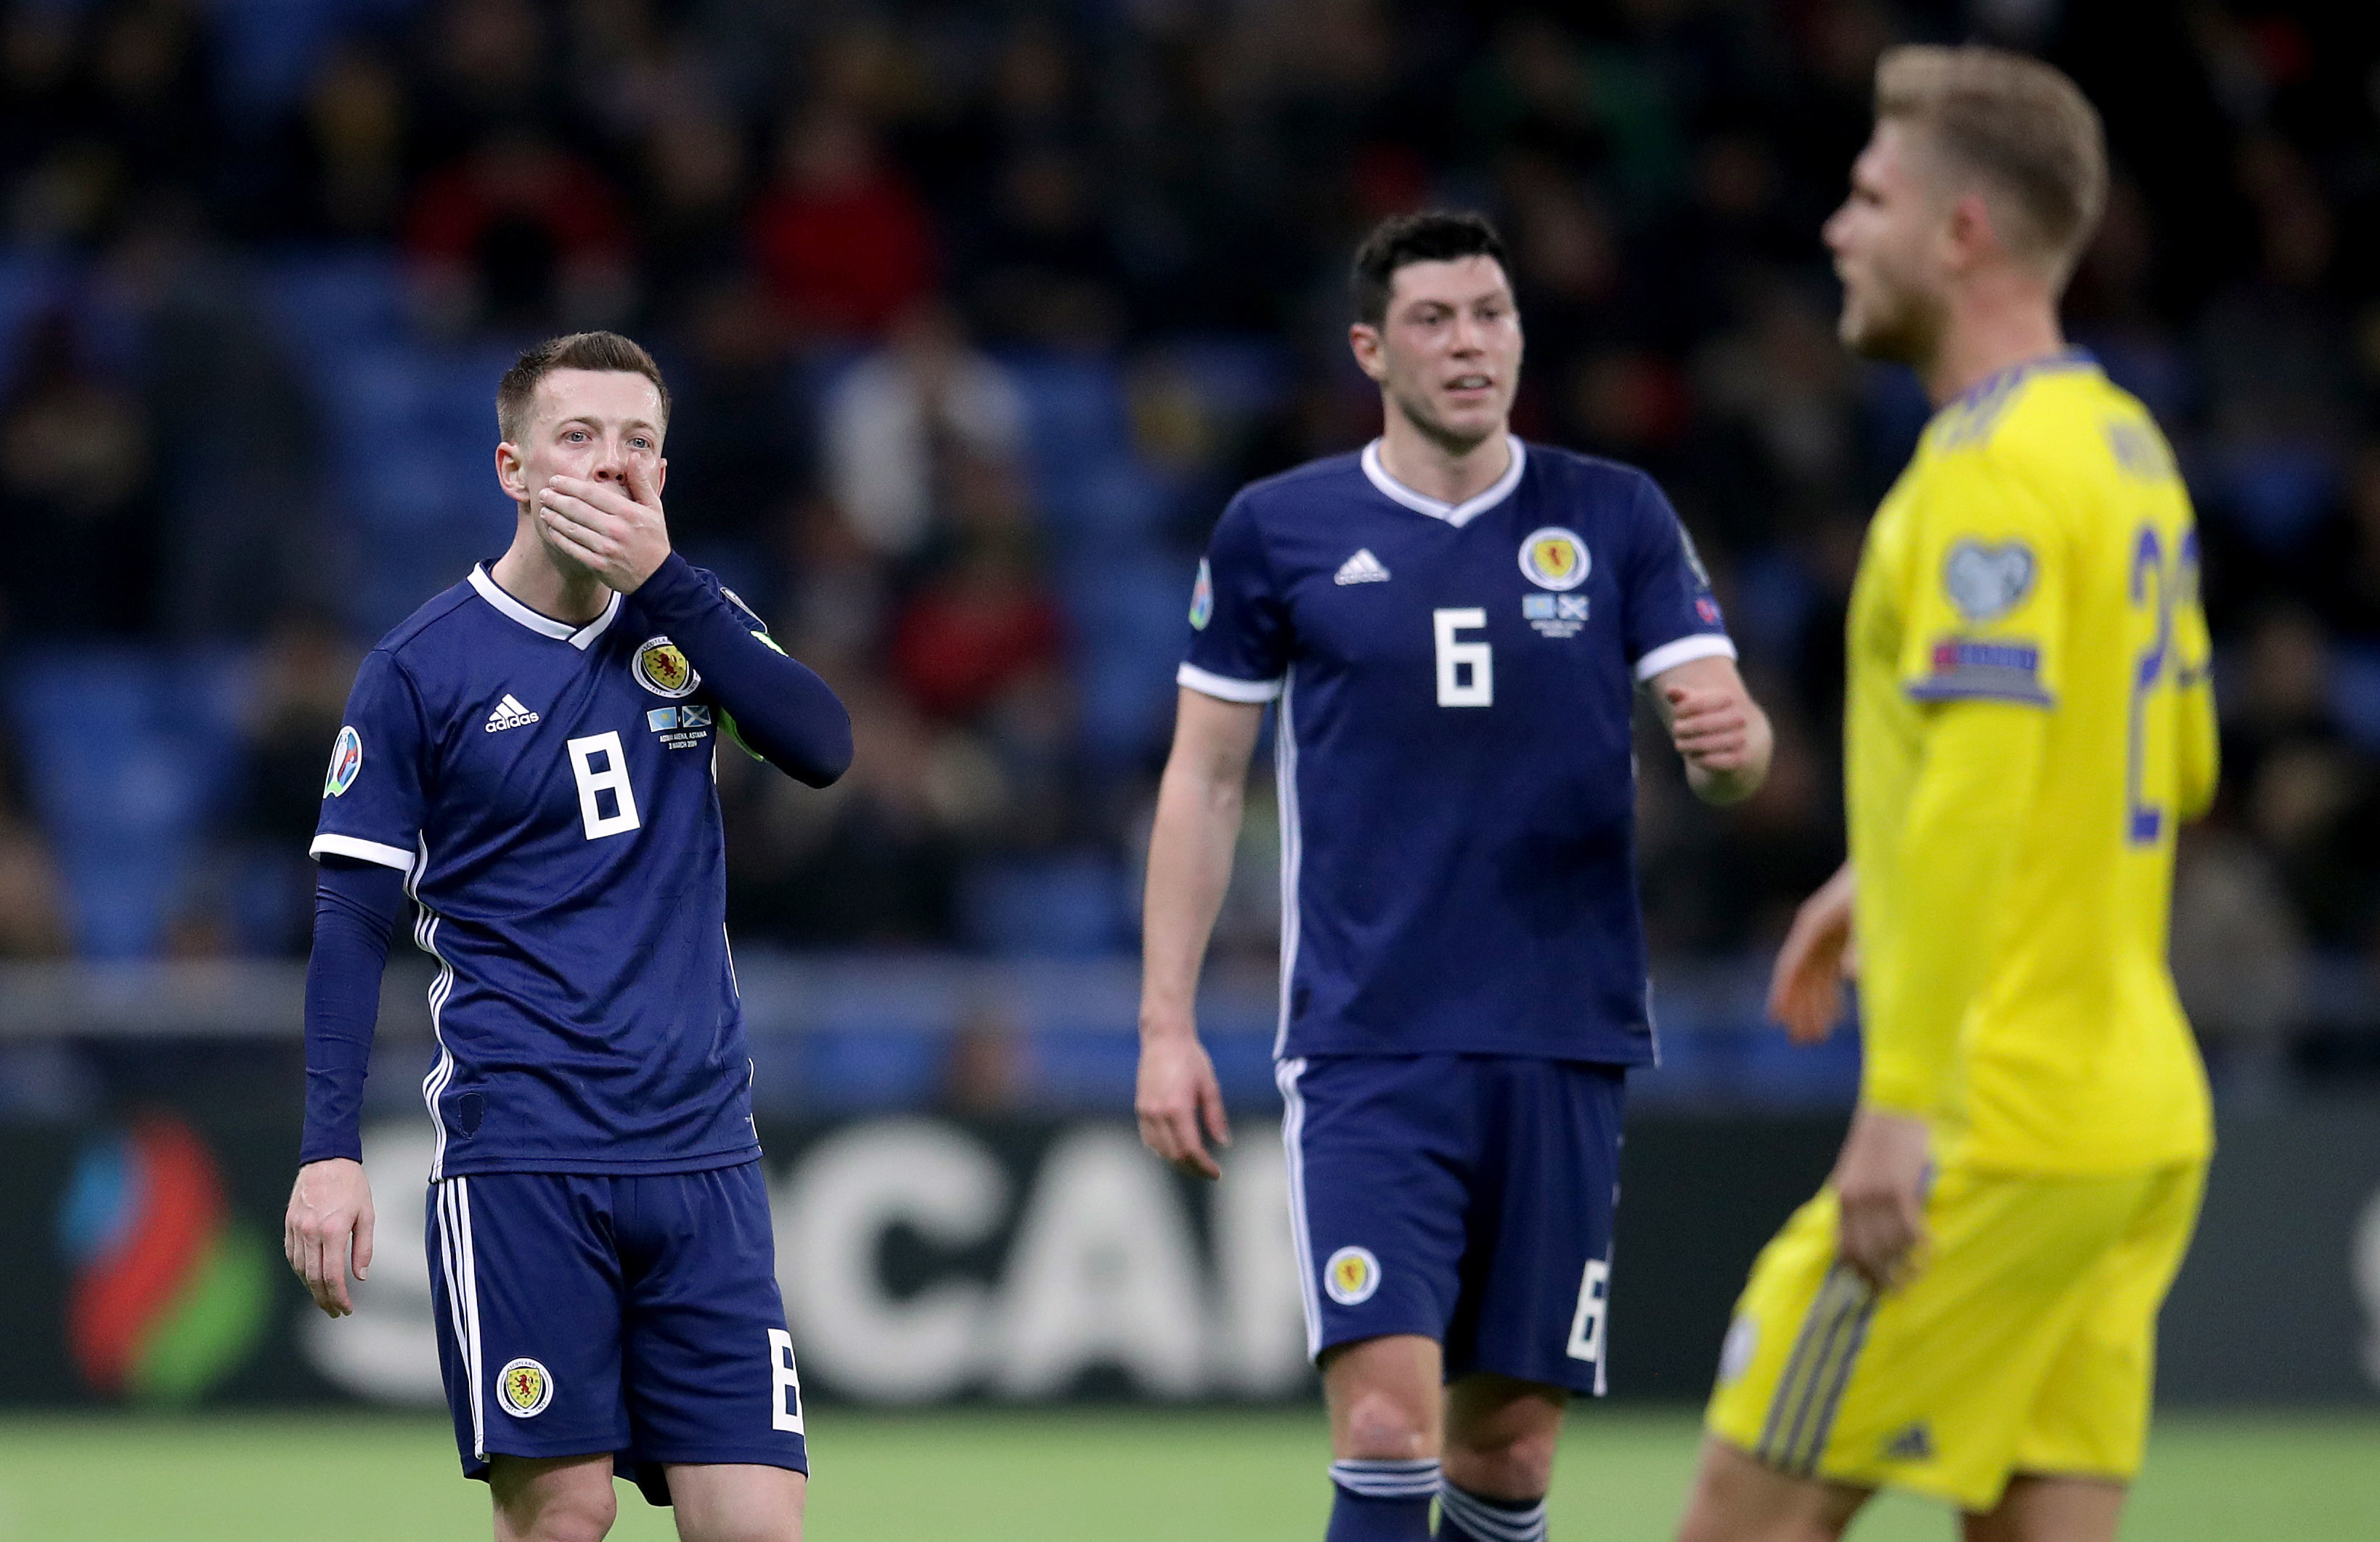 Scotland's Callum McGregor appears dejected during the UEFA Euro 2020 Qualifying, Group I match at the Astana Arena.